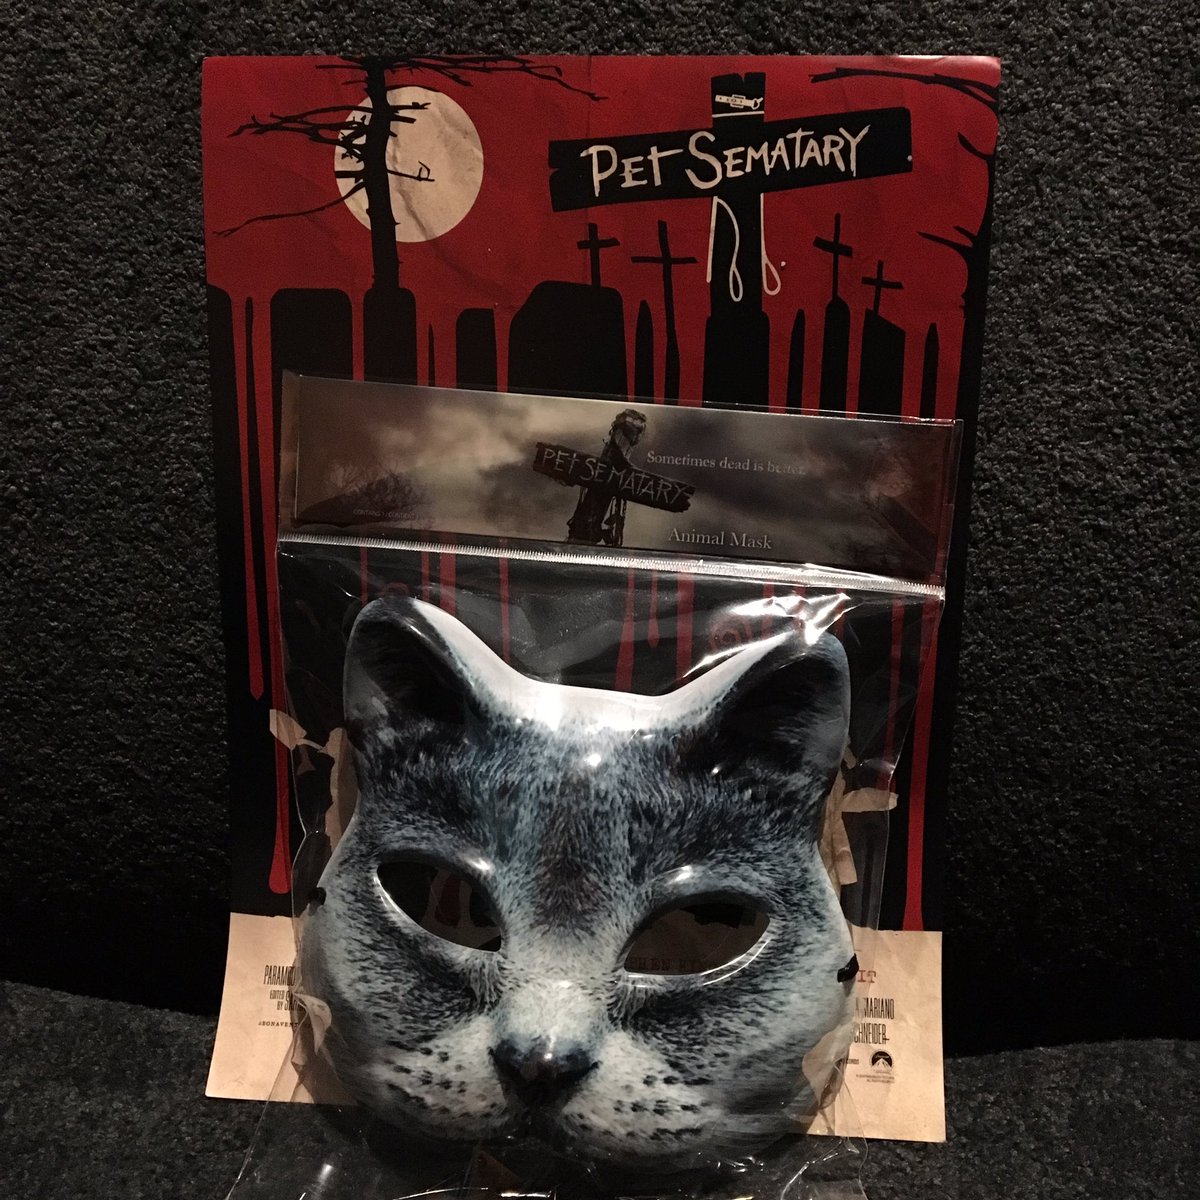 Frightfest On Twitter Everyone Attending Our Special Petsematary Preview Tonight Gets A Spooky Mask And Mini Poster